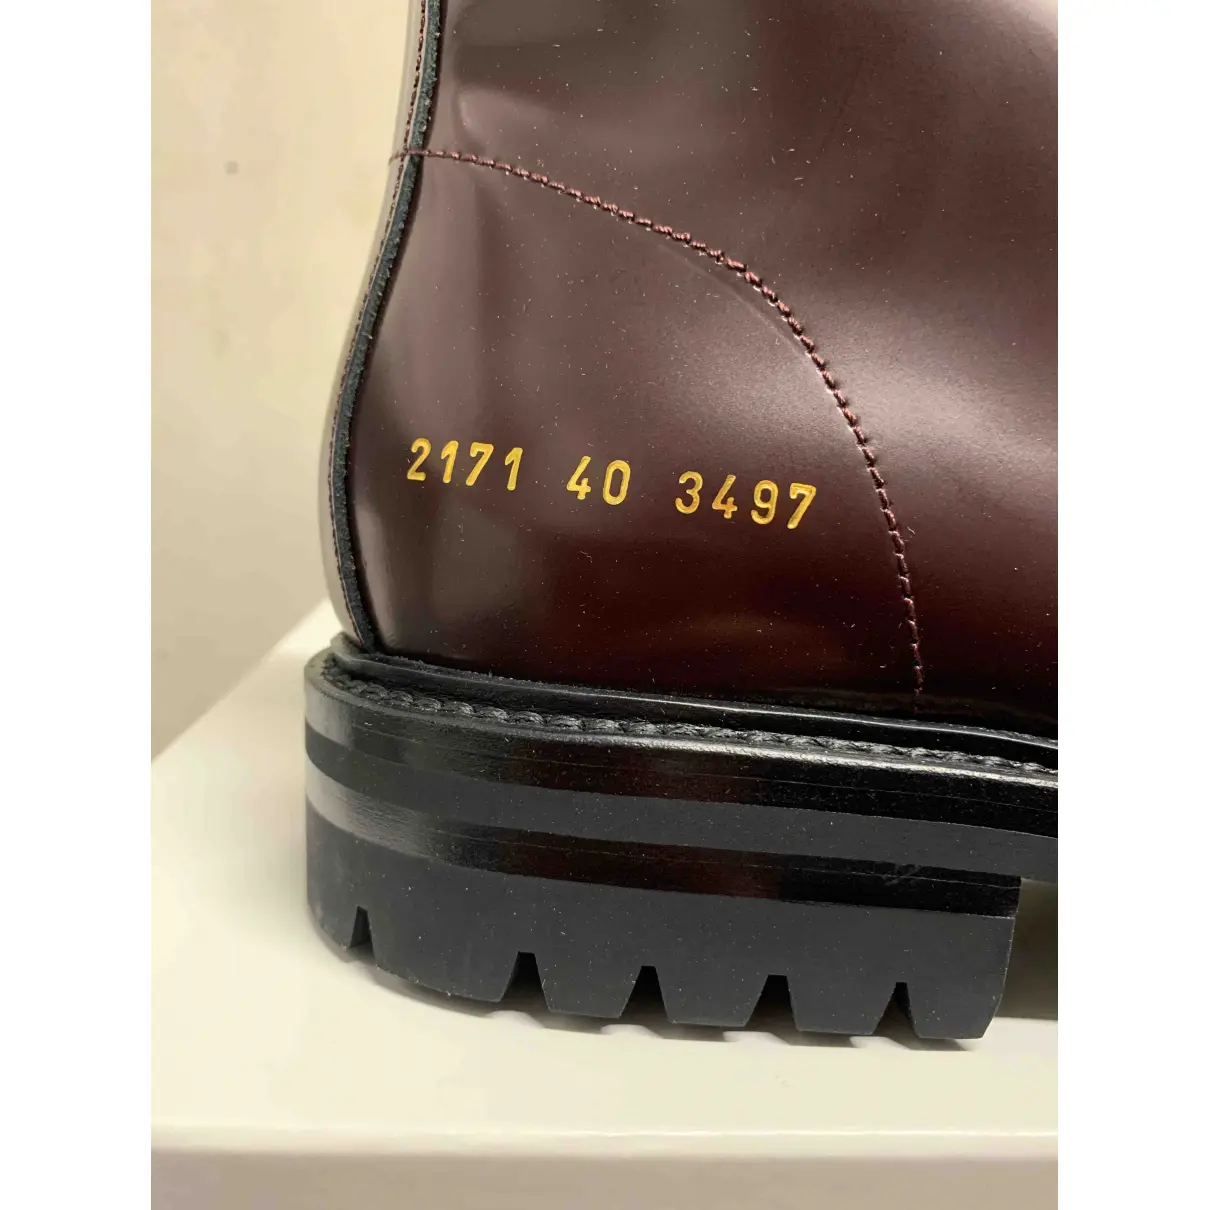 Luxury Common Projects Boots Men